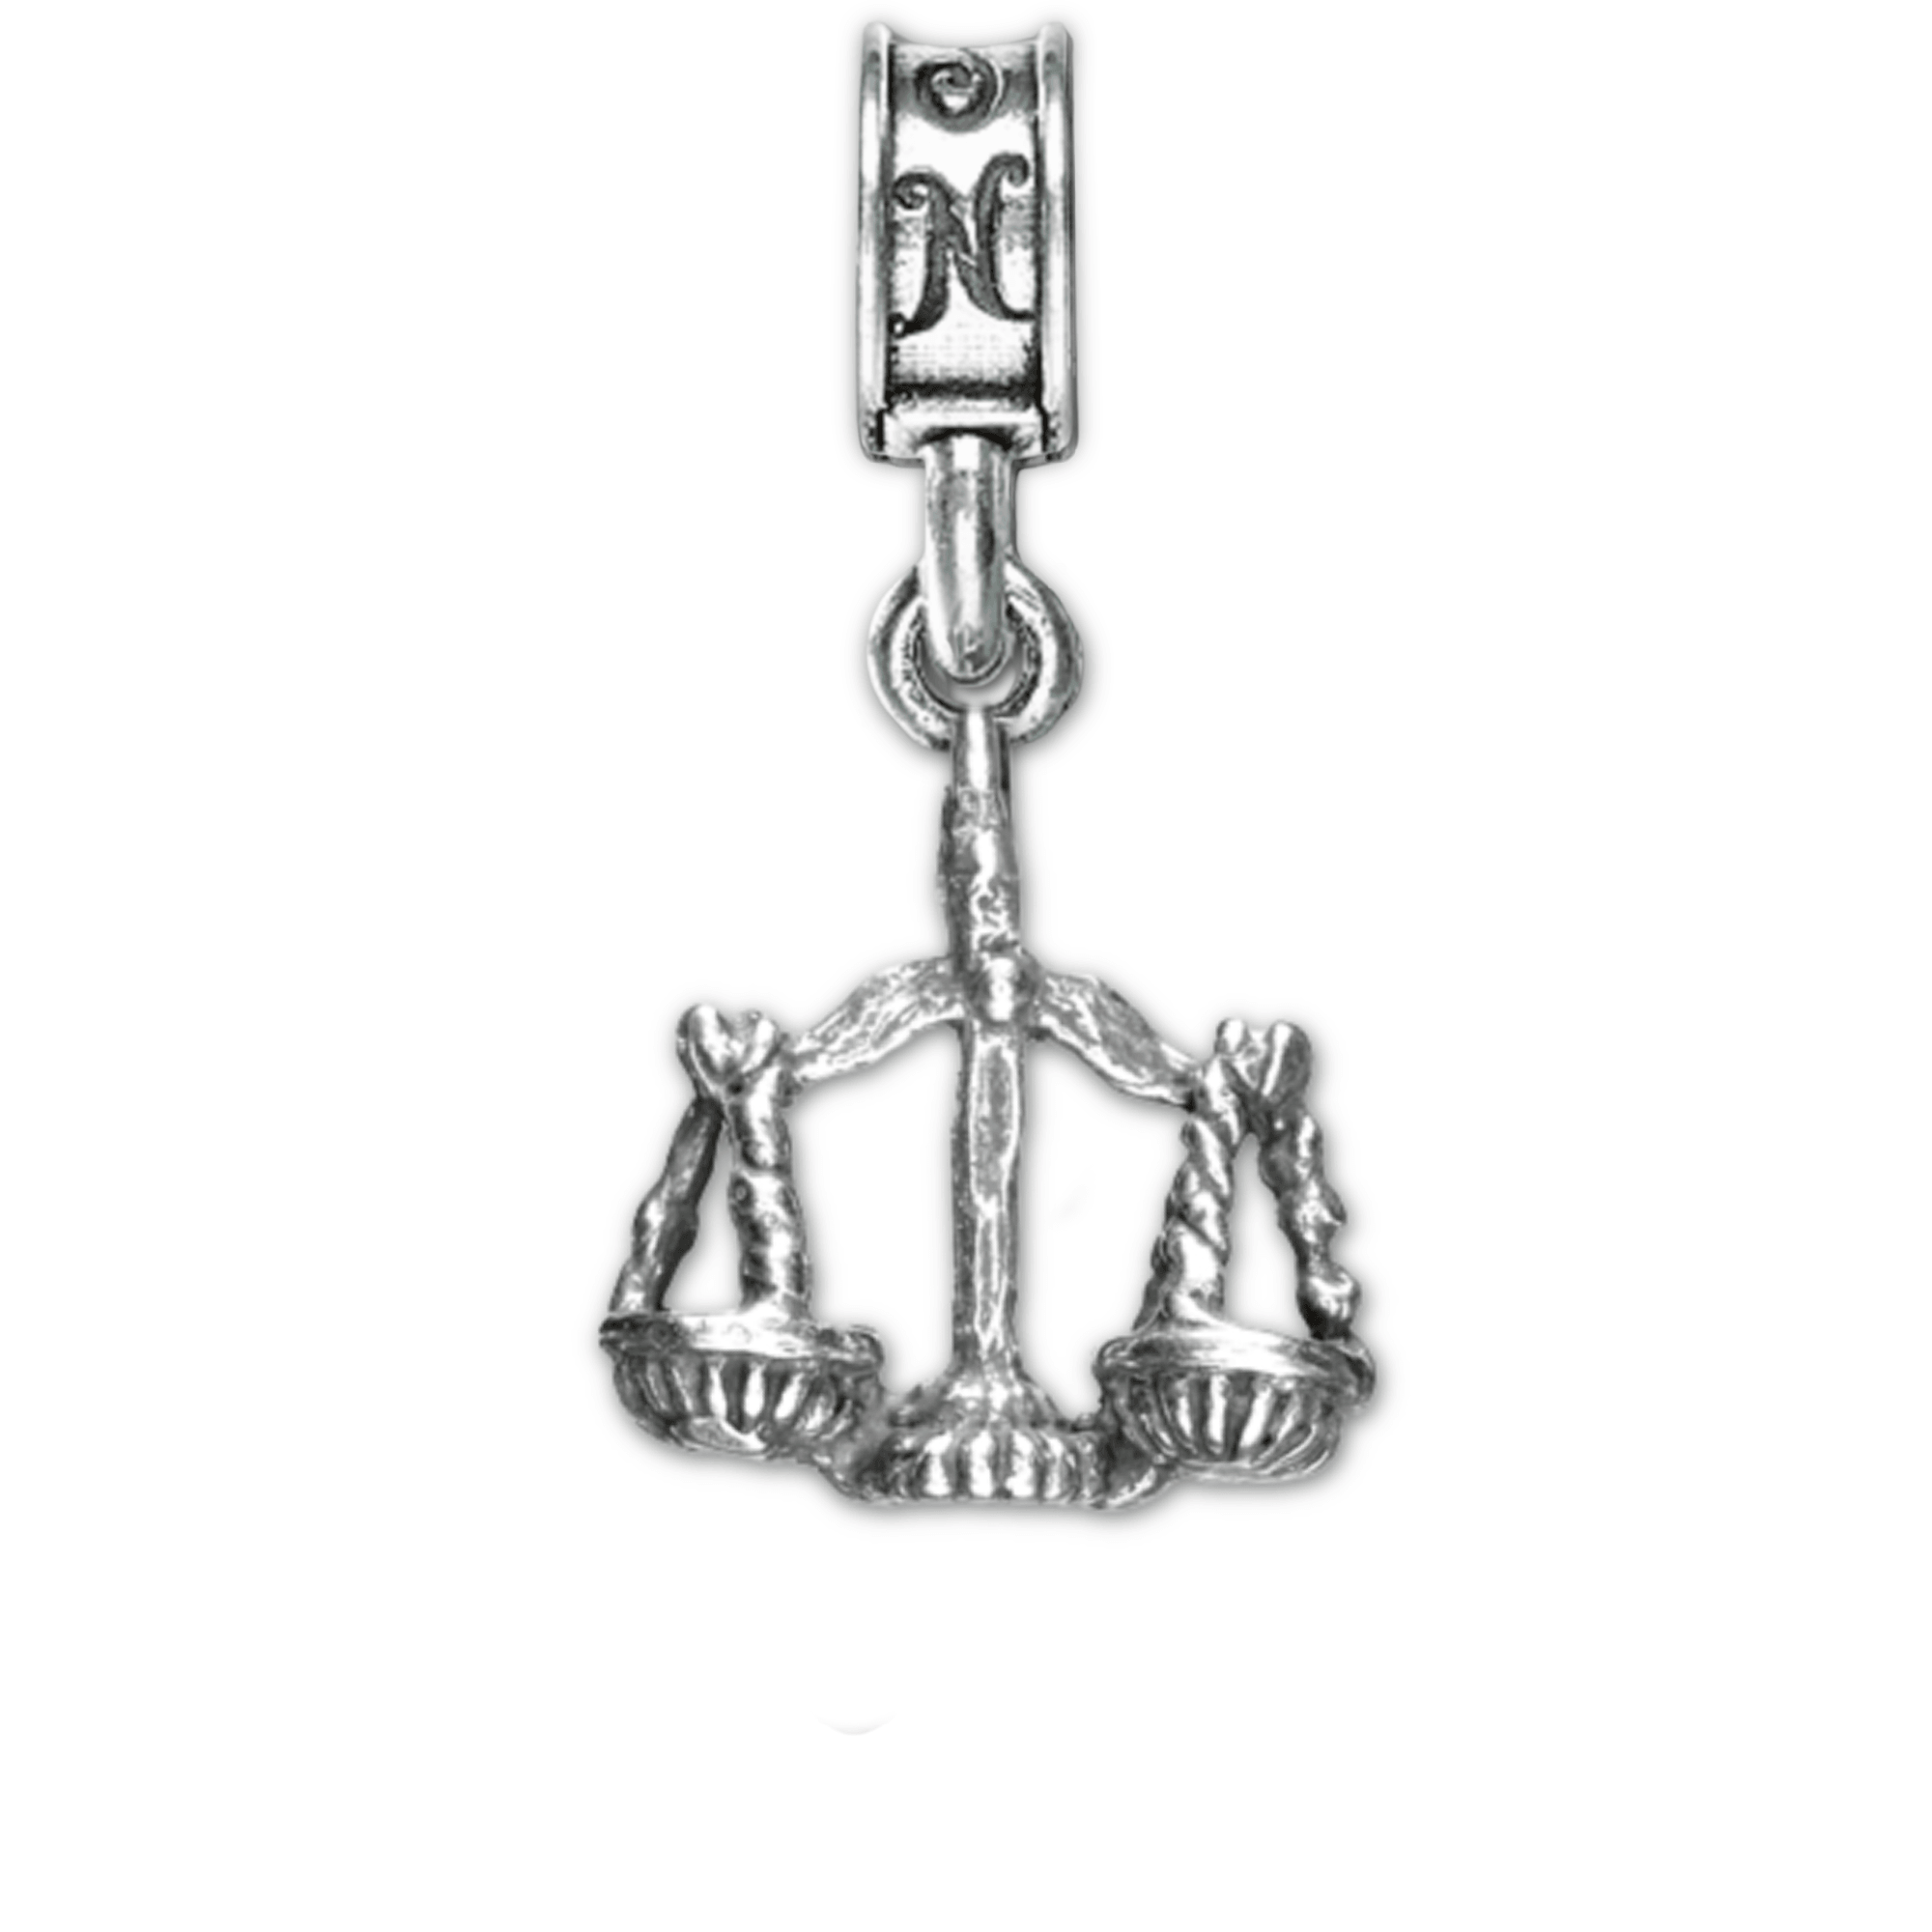 Military Jewelry, Military Charms, Military Gifts, Scales of Justice Charm, JAG Charm